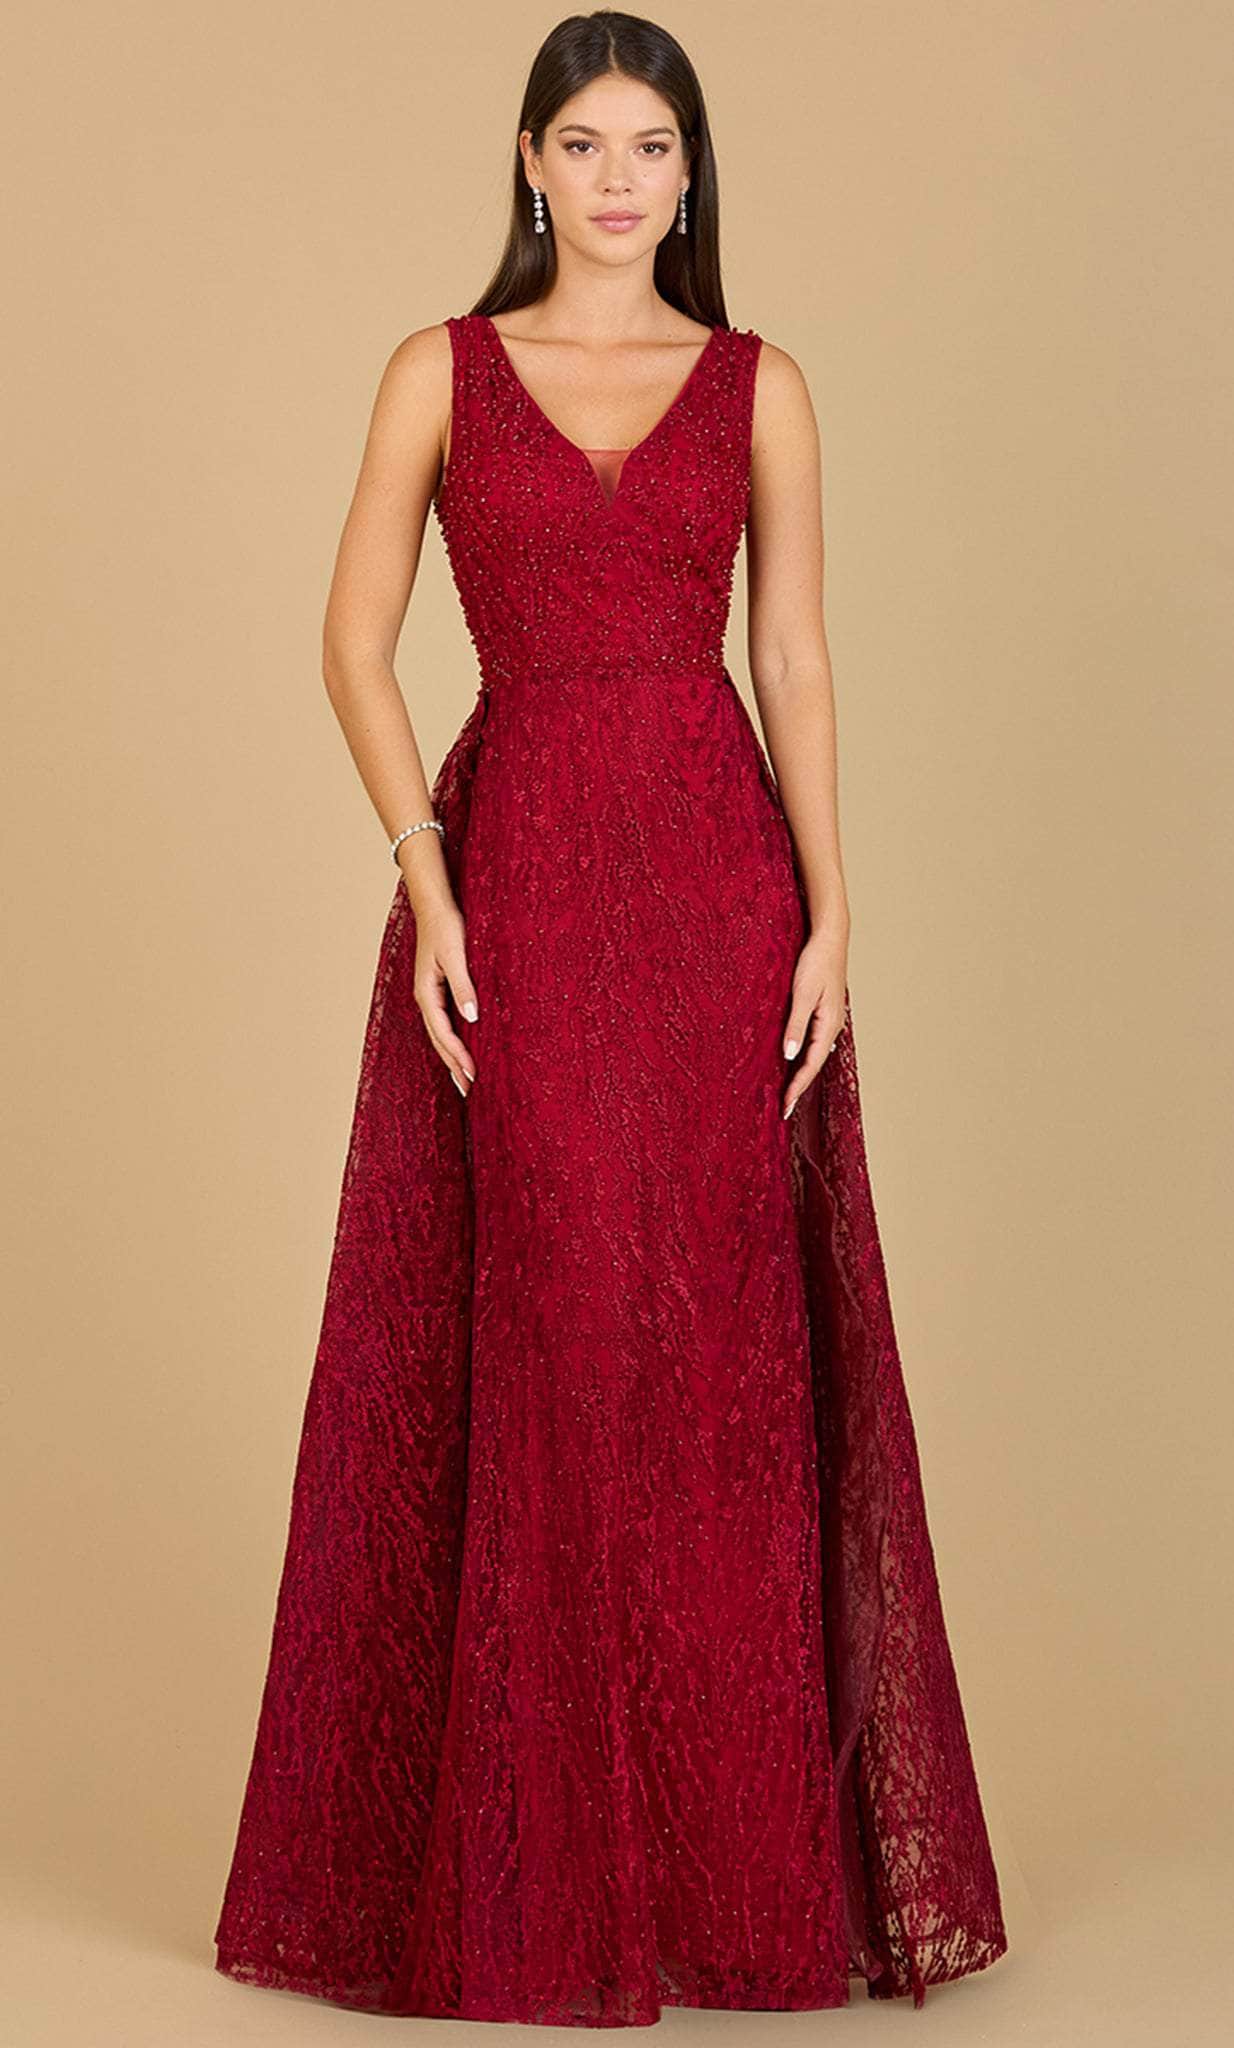 Lara Dresses 29197 - Plunging V-Neck Lace Evening Gown
